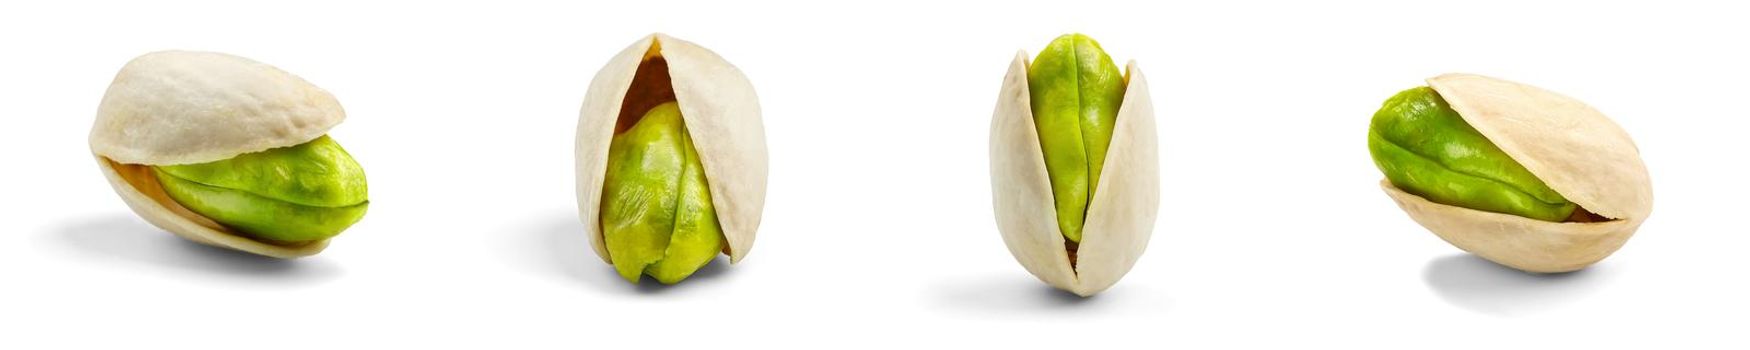 pistachio isolated on white background, clipping path